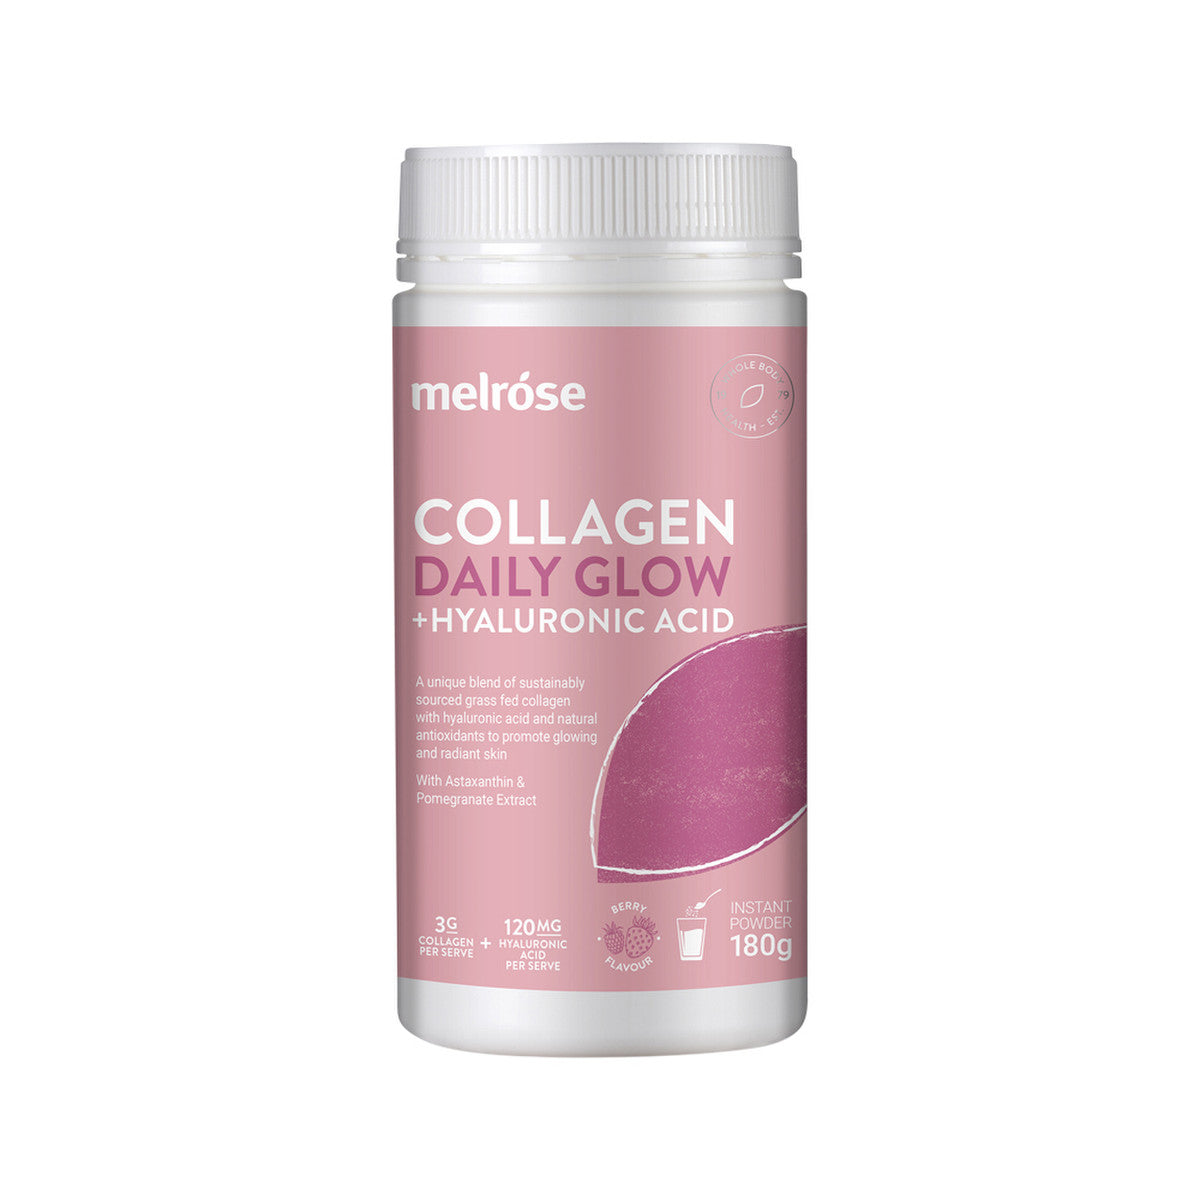 Melrose - Collagen Daily Glow + Hyaluronic Acid Berry Flavour Instant Powder